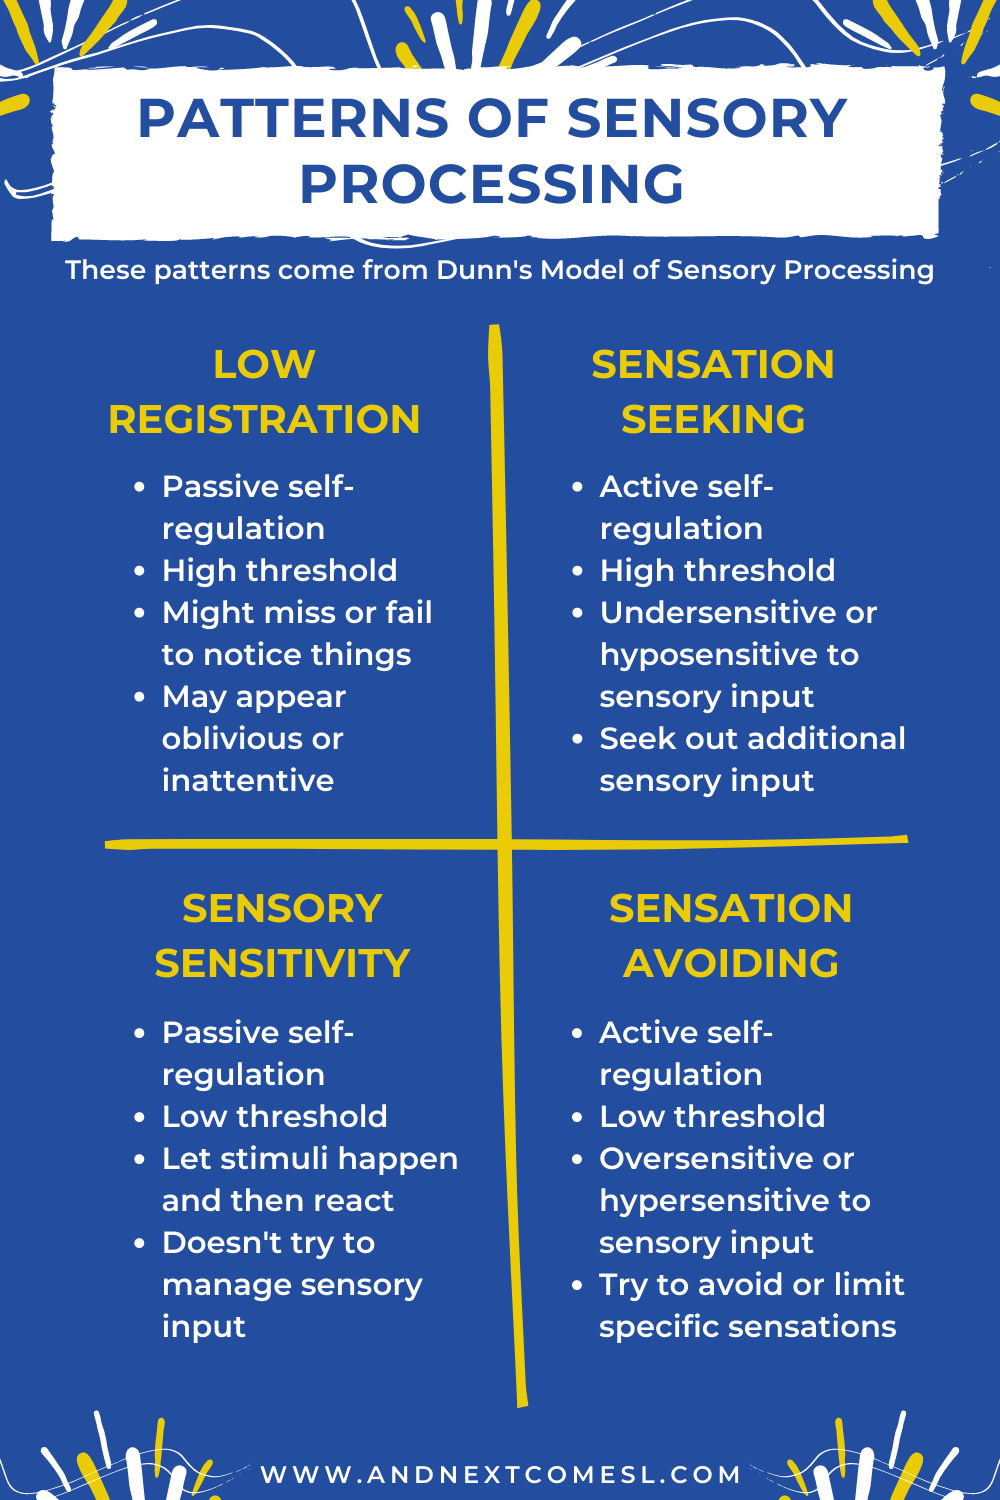 Patterns of sensory processing as outlined by Dunn's Model of Sensory Processing